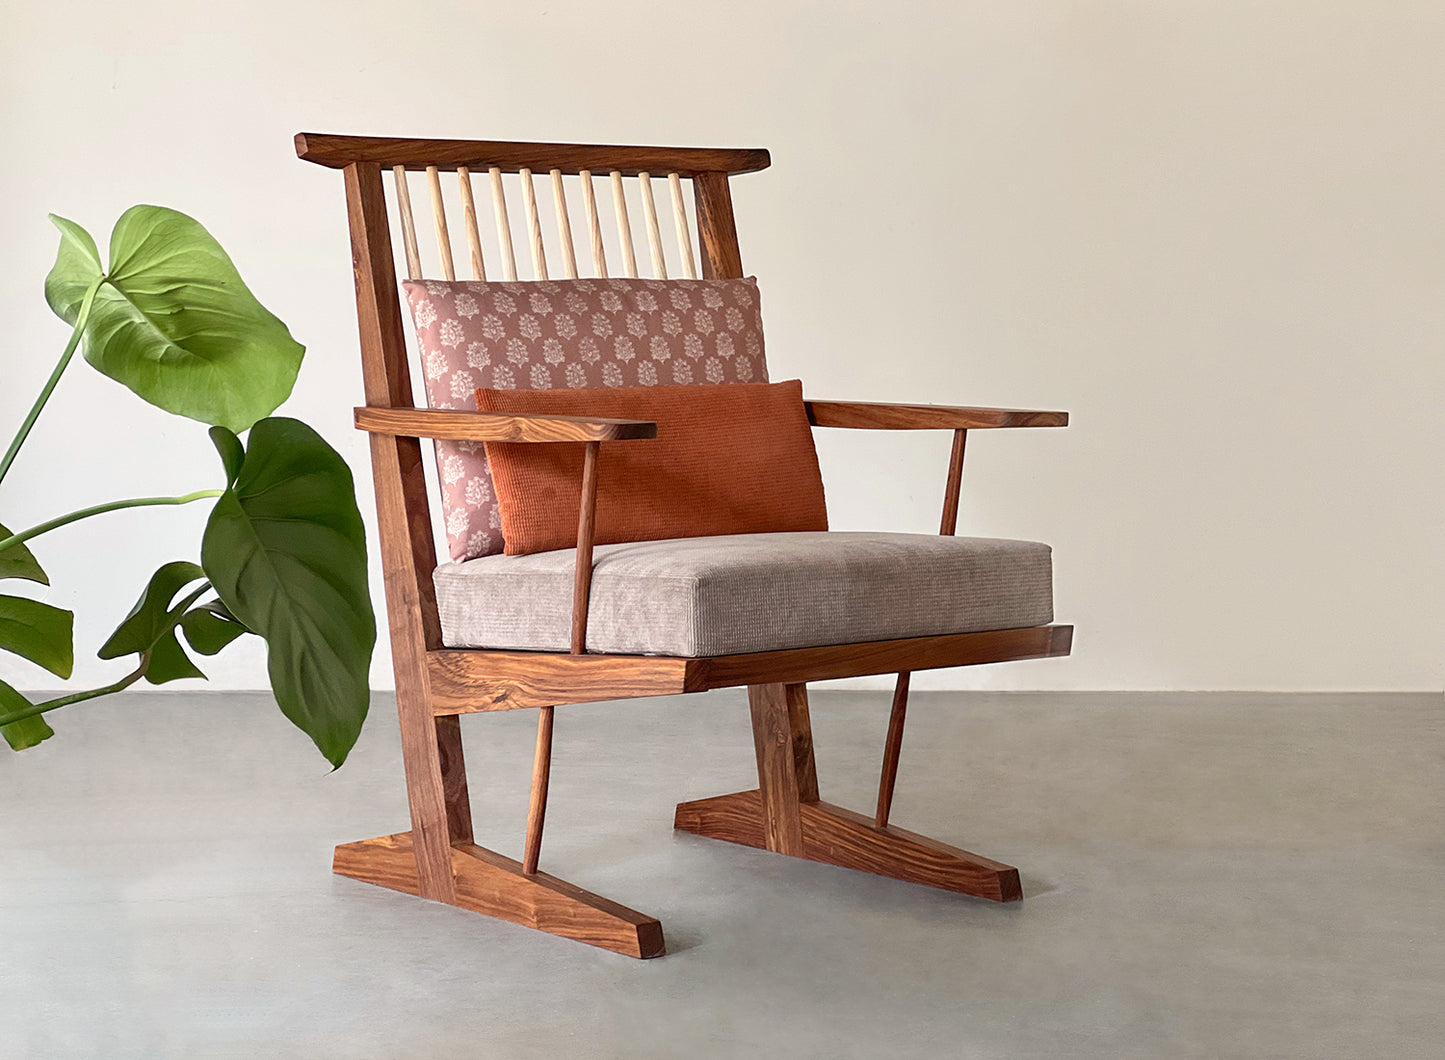 Enid Lounger with Arm Rest - Rosewood